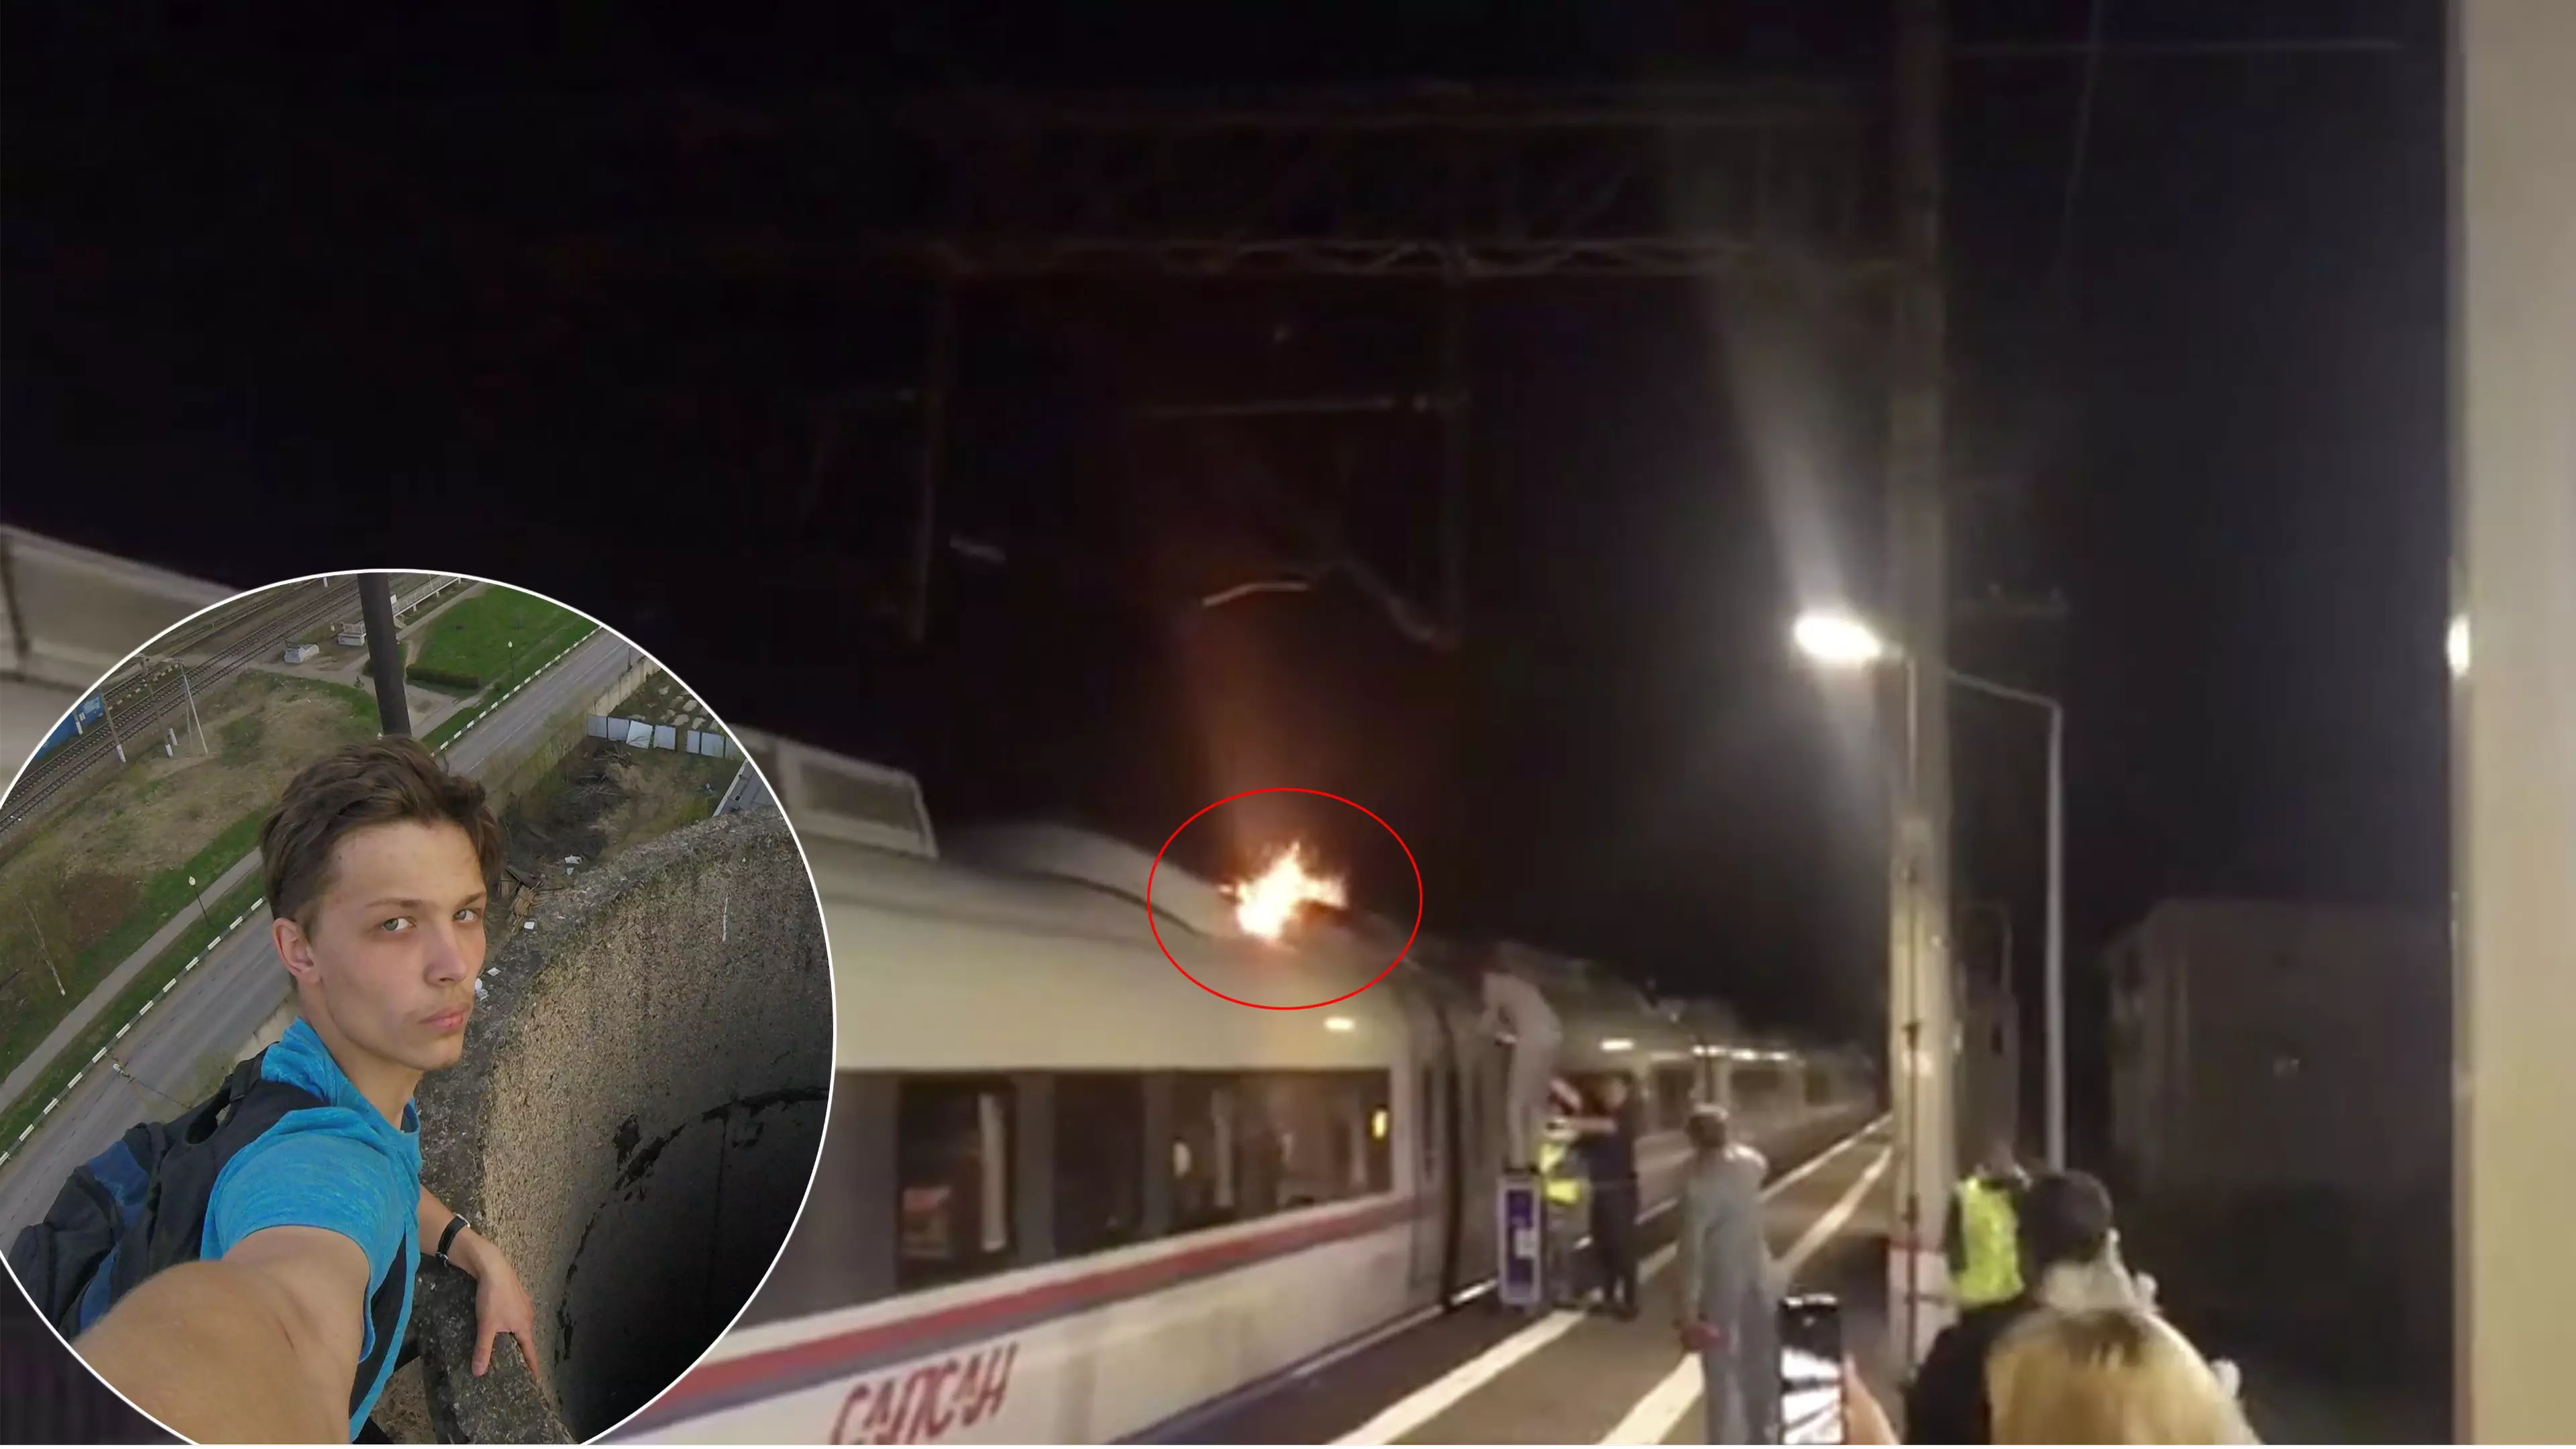 'Train Surfer' Burned Alive On Roof Of 155mph Train Amid Fears For 'Missing Female Companion'